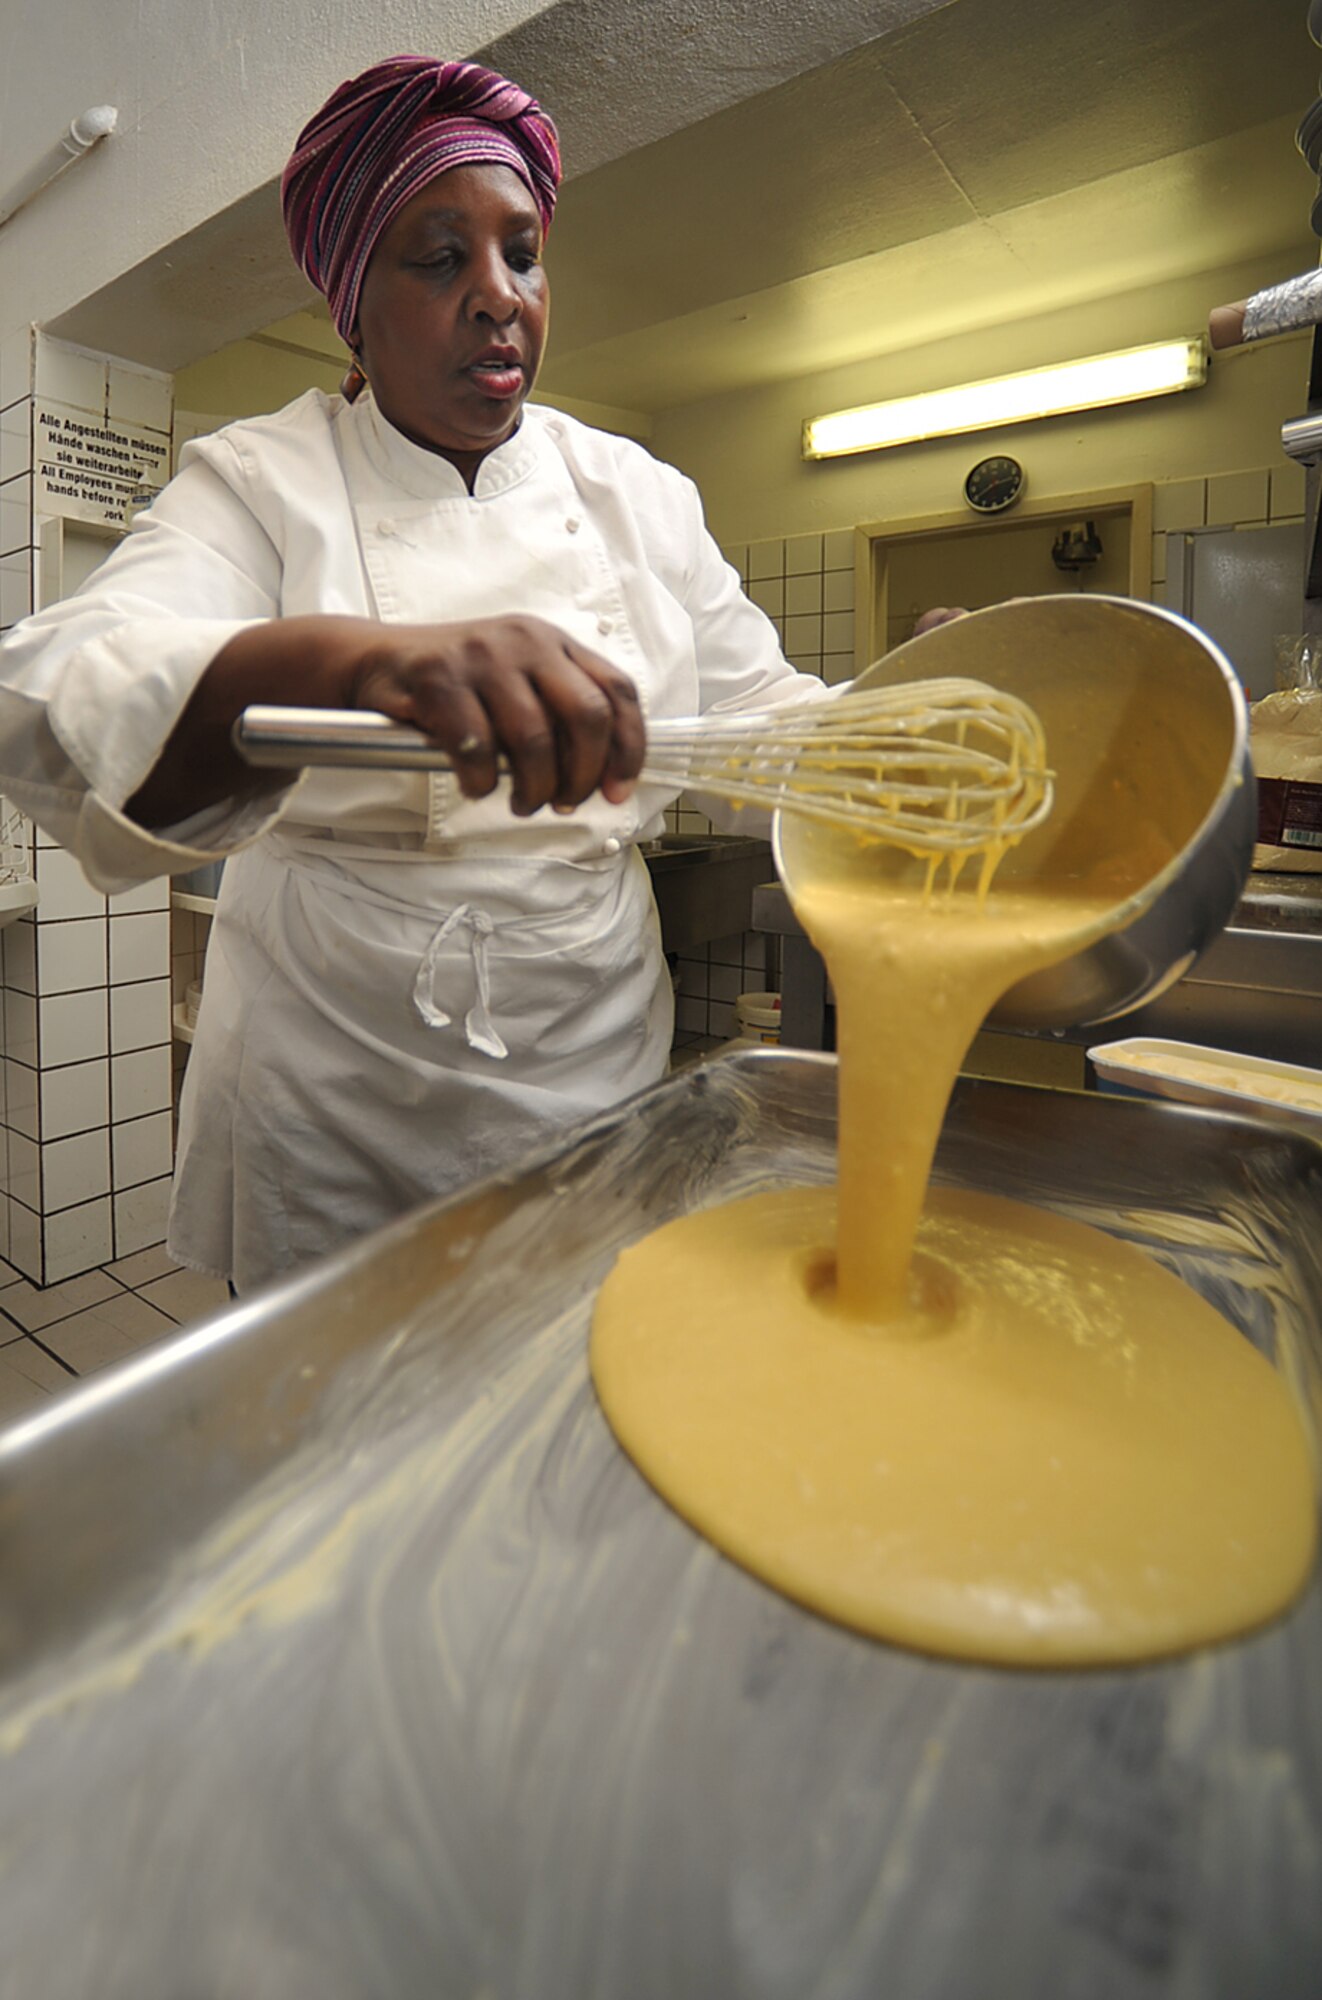 Brenda 'Mama' West, professional chef, pours cornbread batter into a pan in the kitchen of her restaurant, Ramstein village, Germany, Feb. 25, 2010. Mama West has been volunteering her time and cooking skills to feed U.S. servicemembers and wounded warriors in the KMC for over a decade. (U.S. Air Force photo by Senior Airman Tony R. Ritter) 